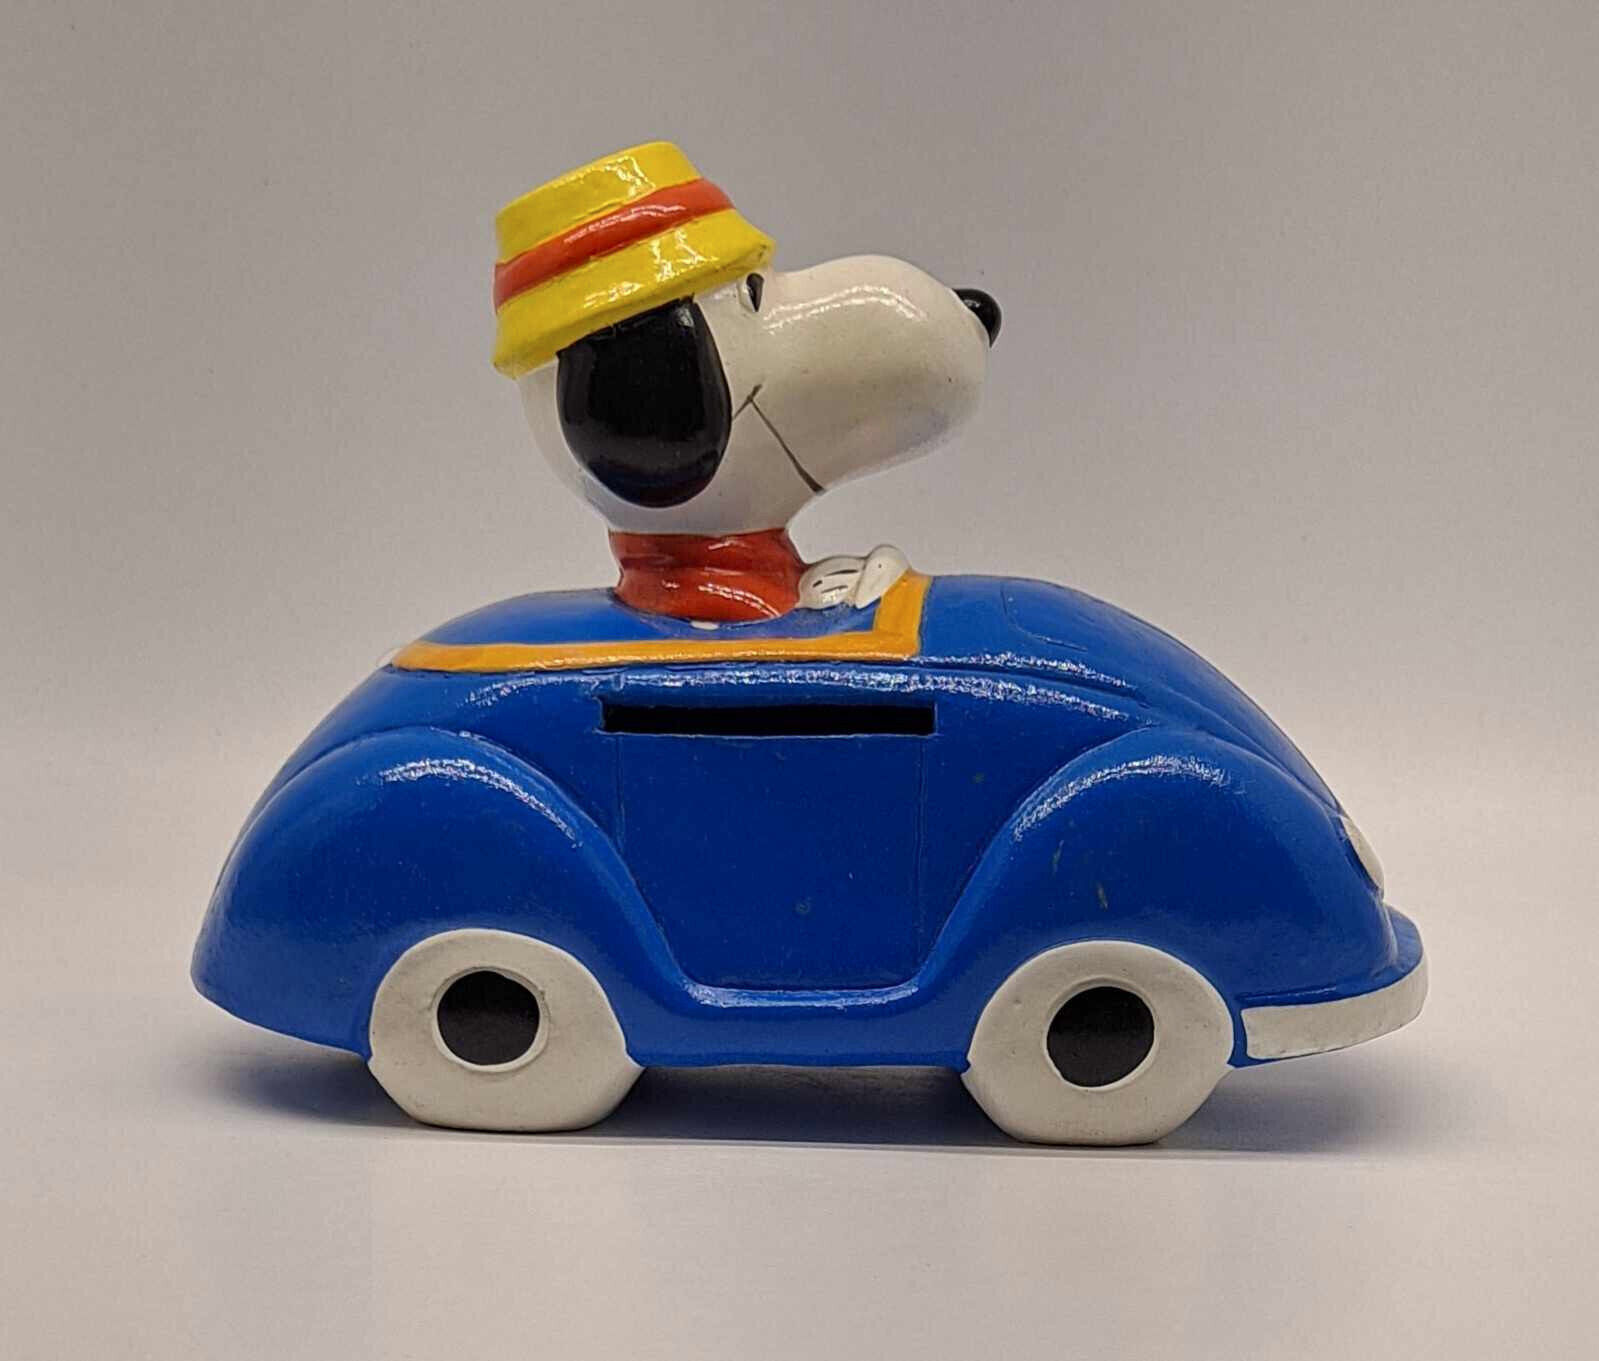 Vintage SNOOPY Peanuts Blue Car Bank - Hand Made in Korea - Volkswagen VW style